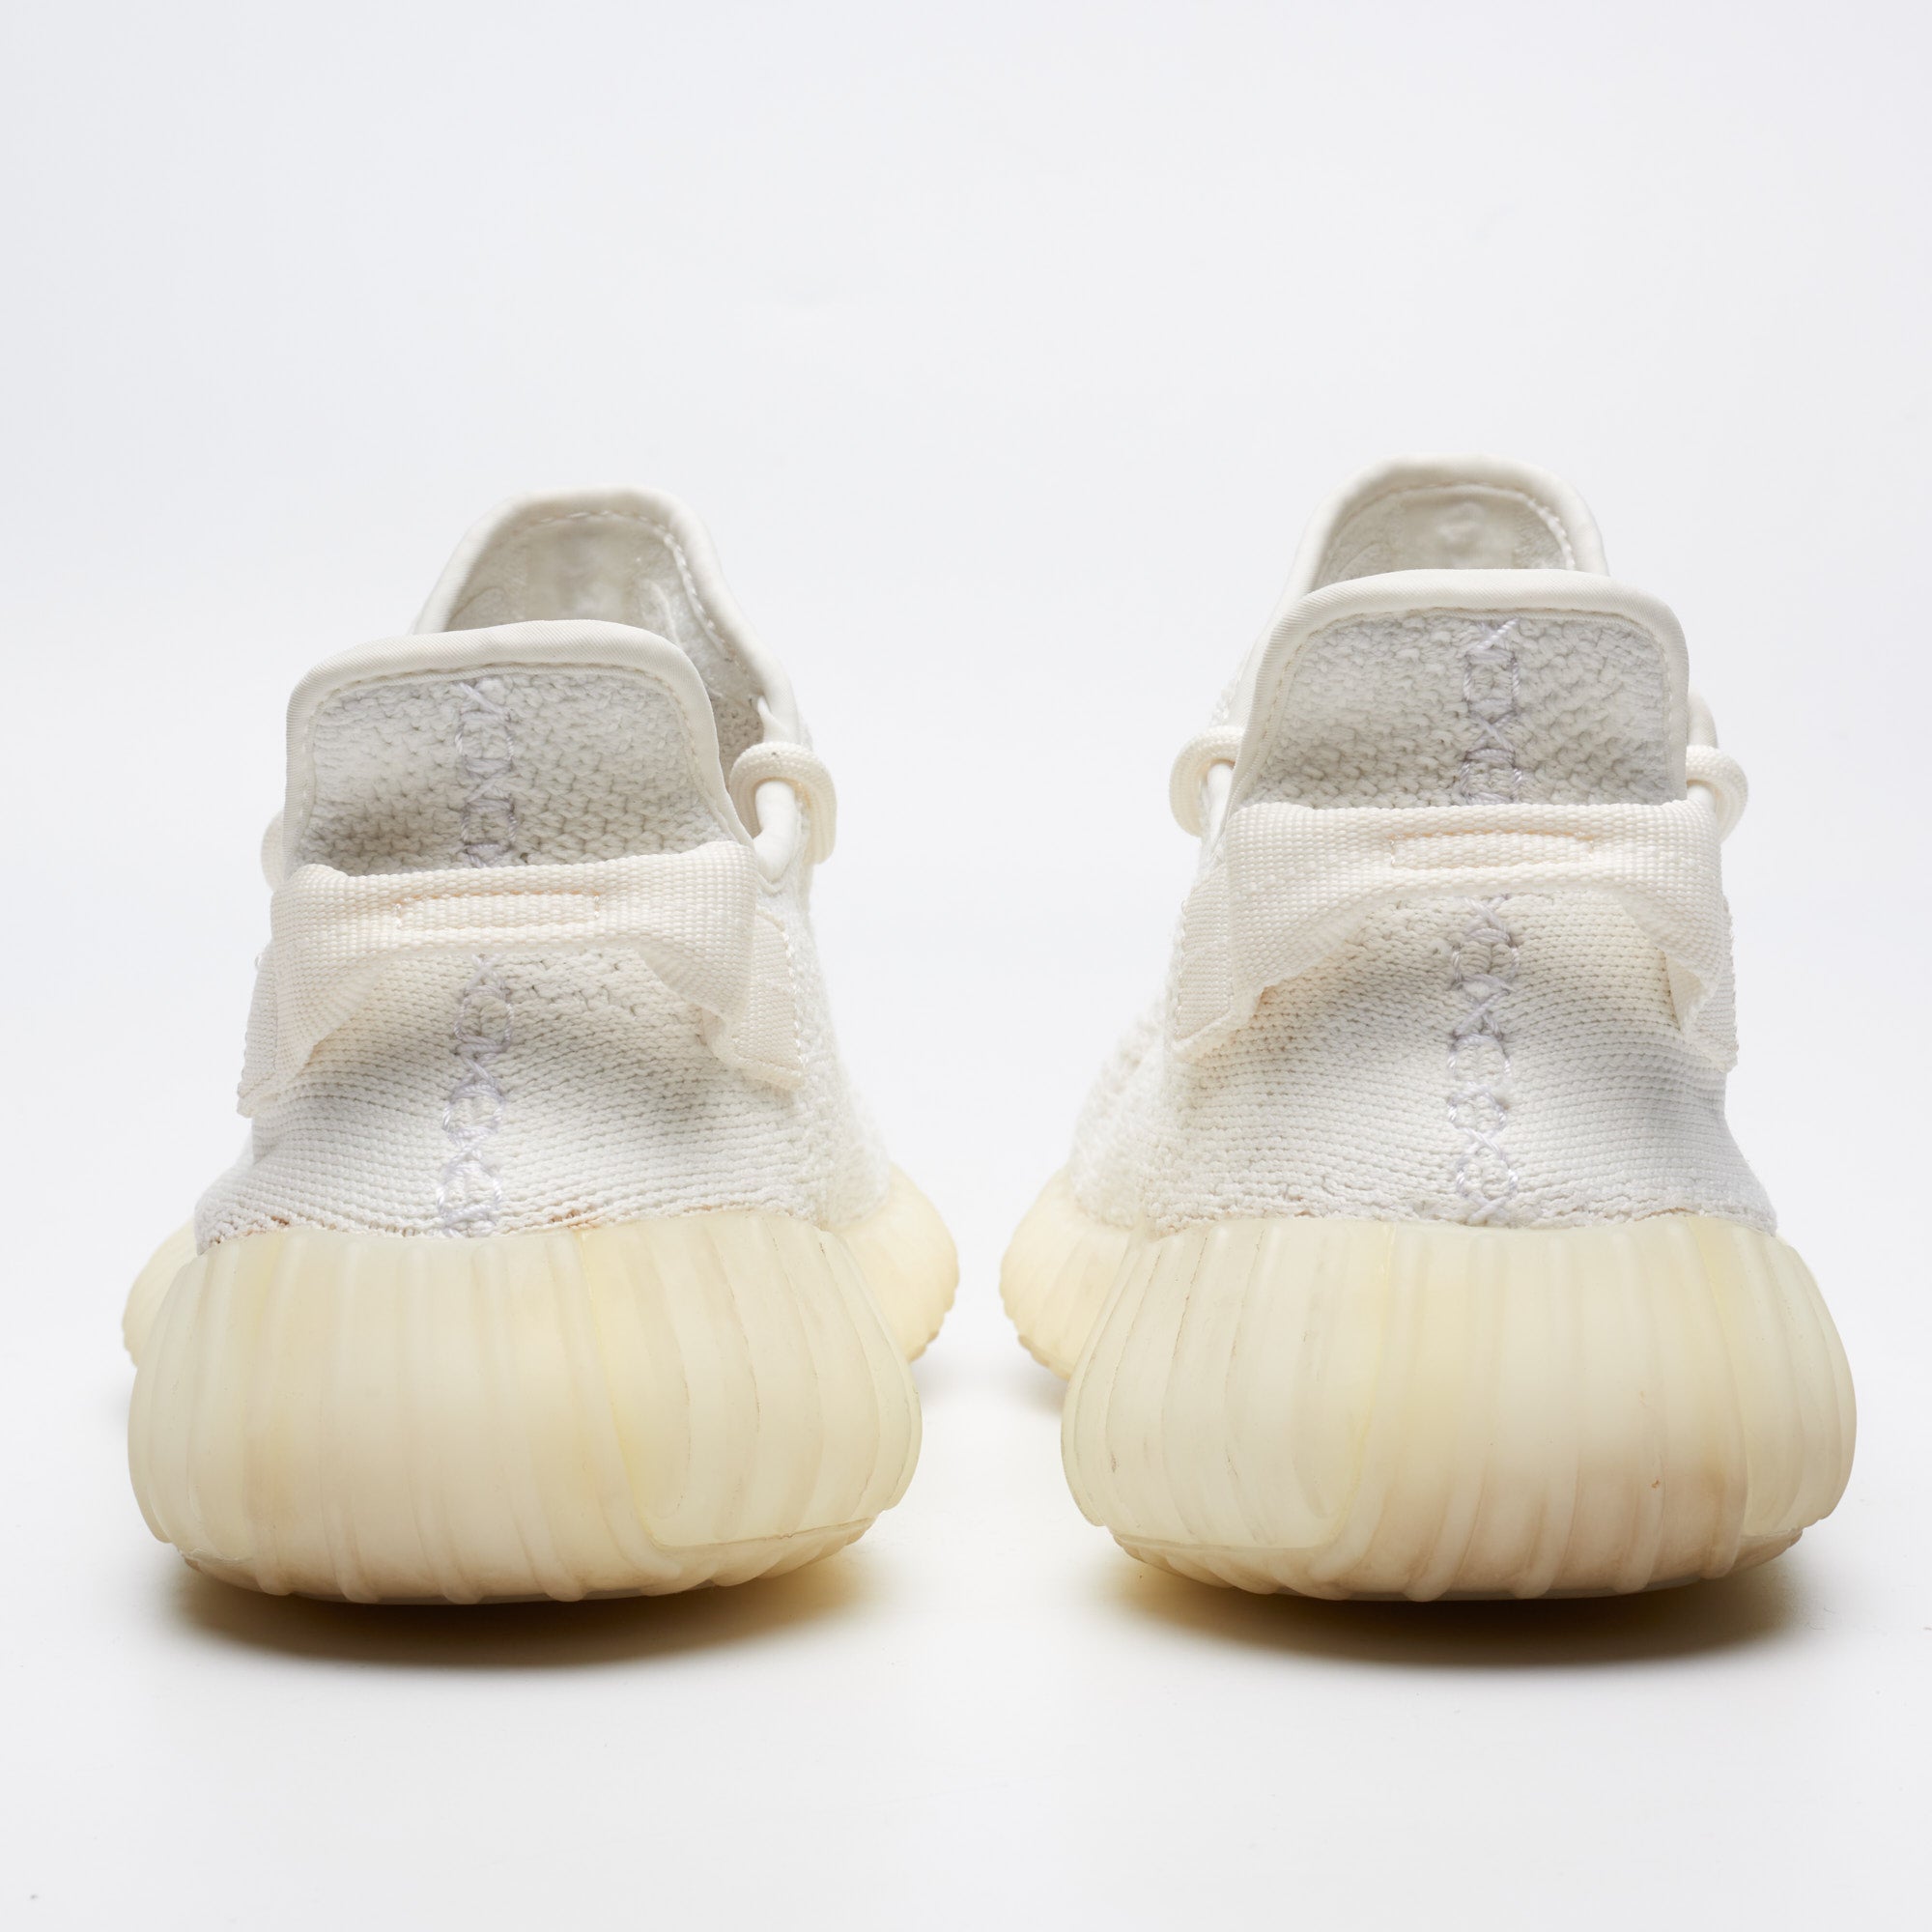 How To Customize Yeezy Boost 350 Cream White - Customs By BB 